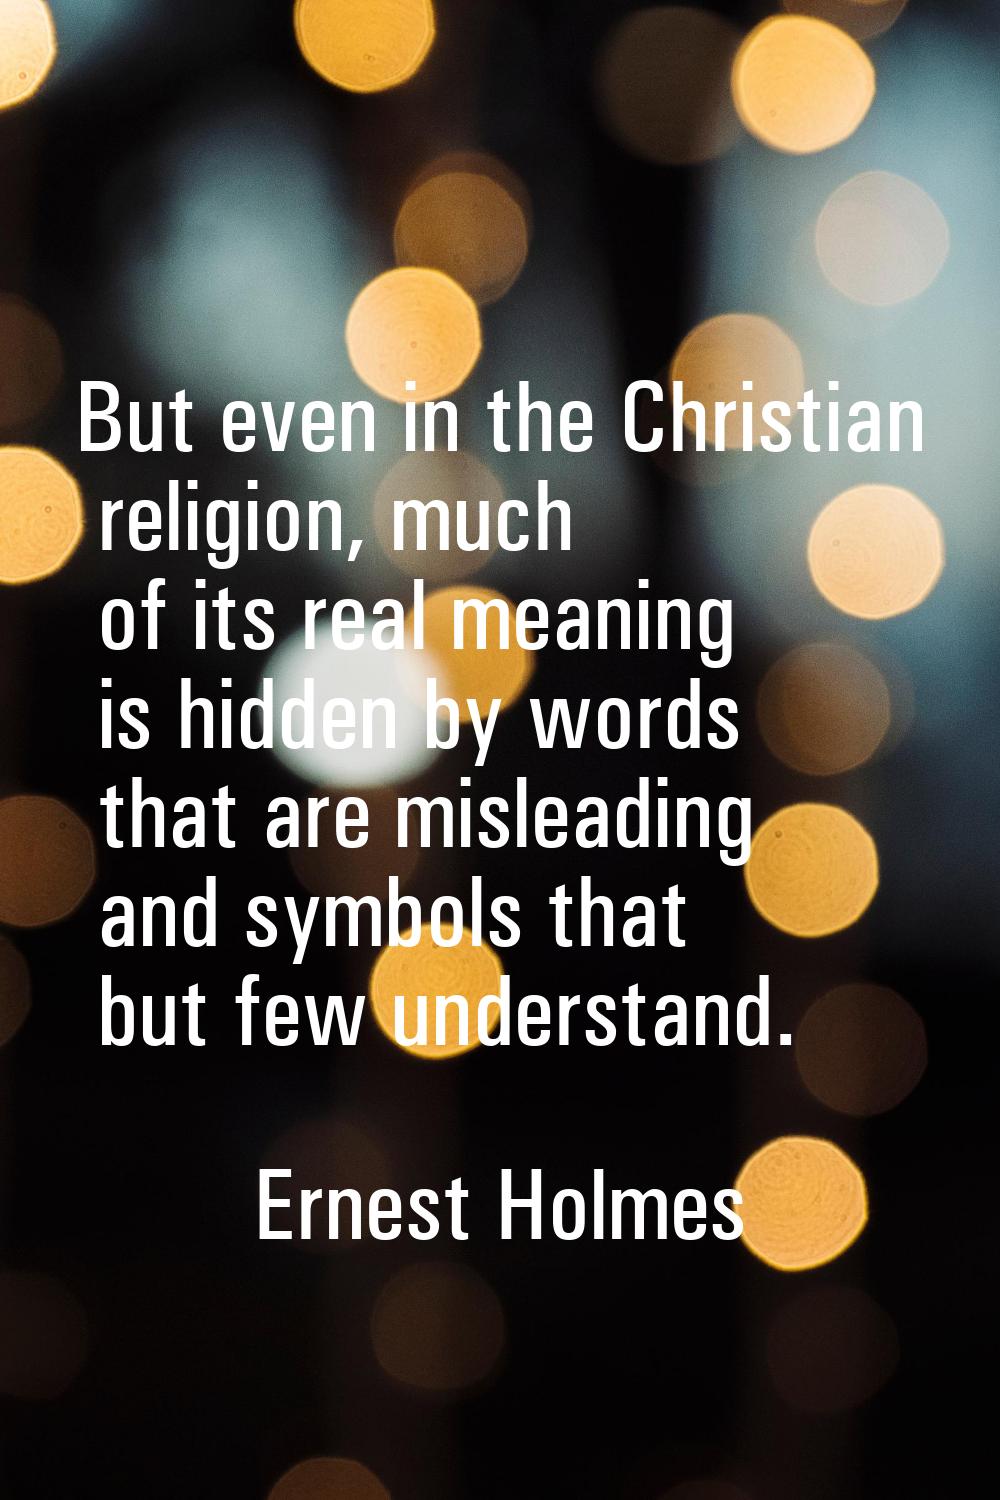 But even in the Christian religion, much of its real meaning is hidden by words that are misleading